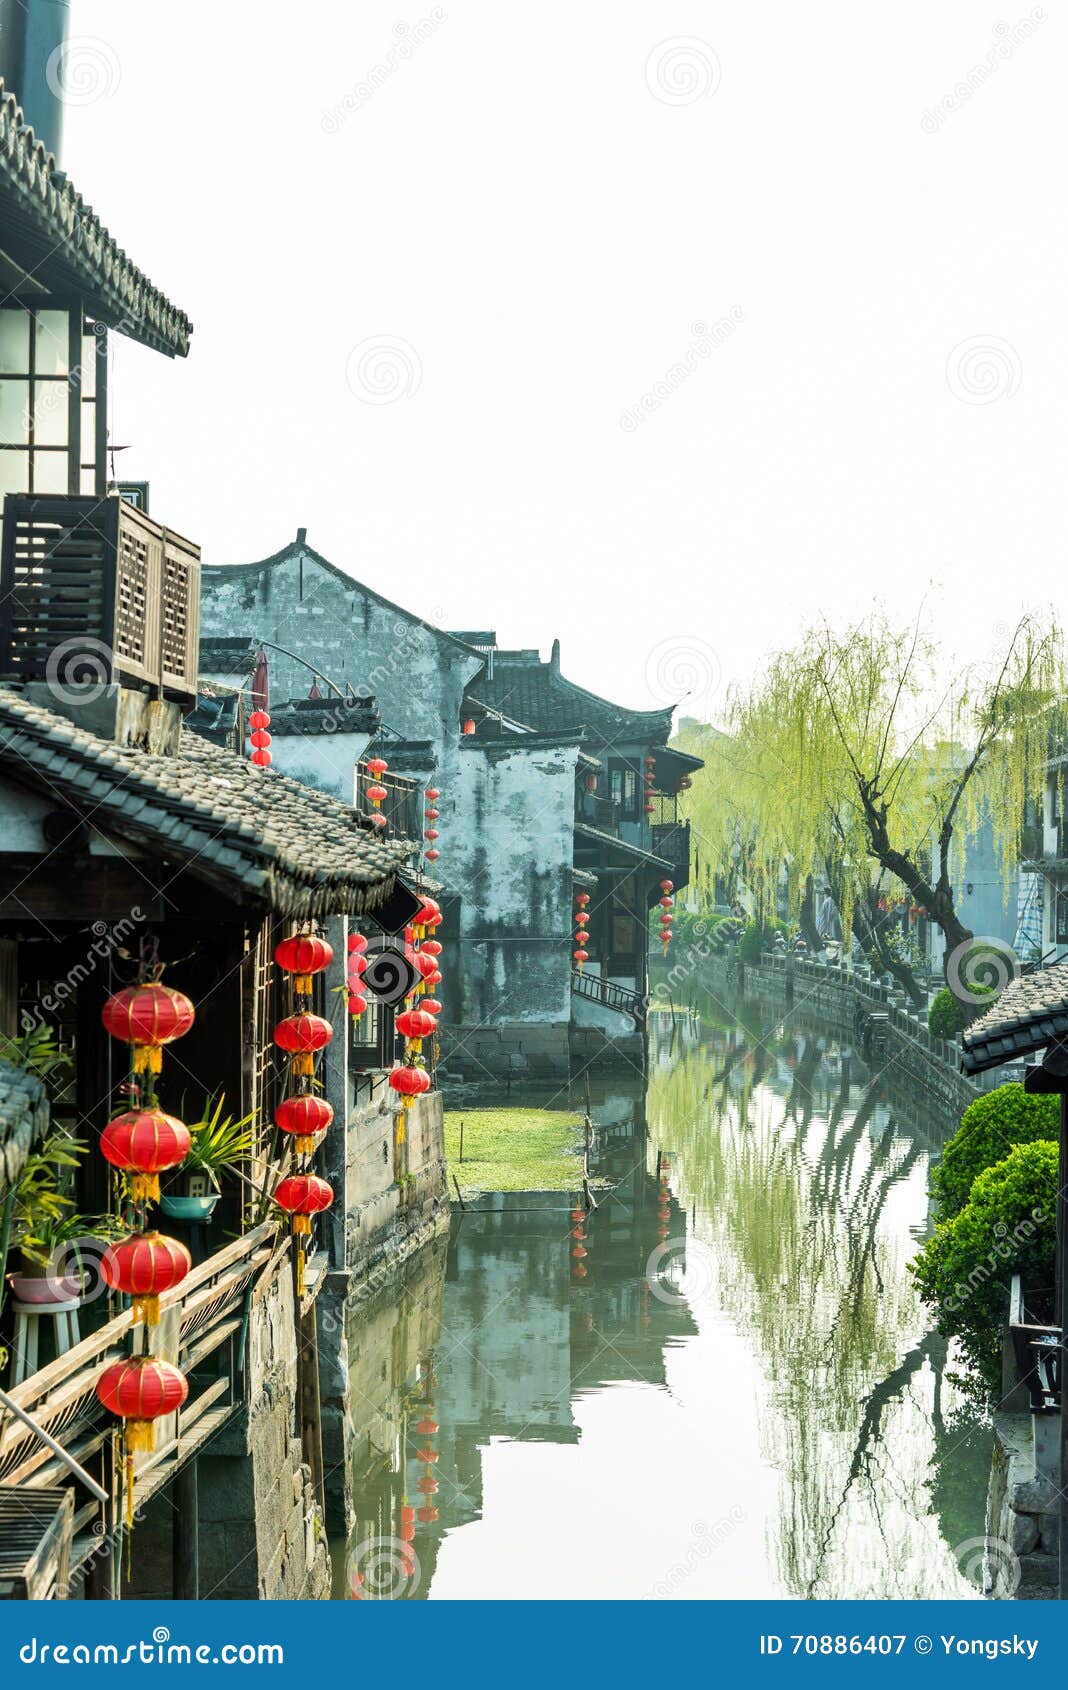 xitang ancient watertown scenery in the morning